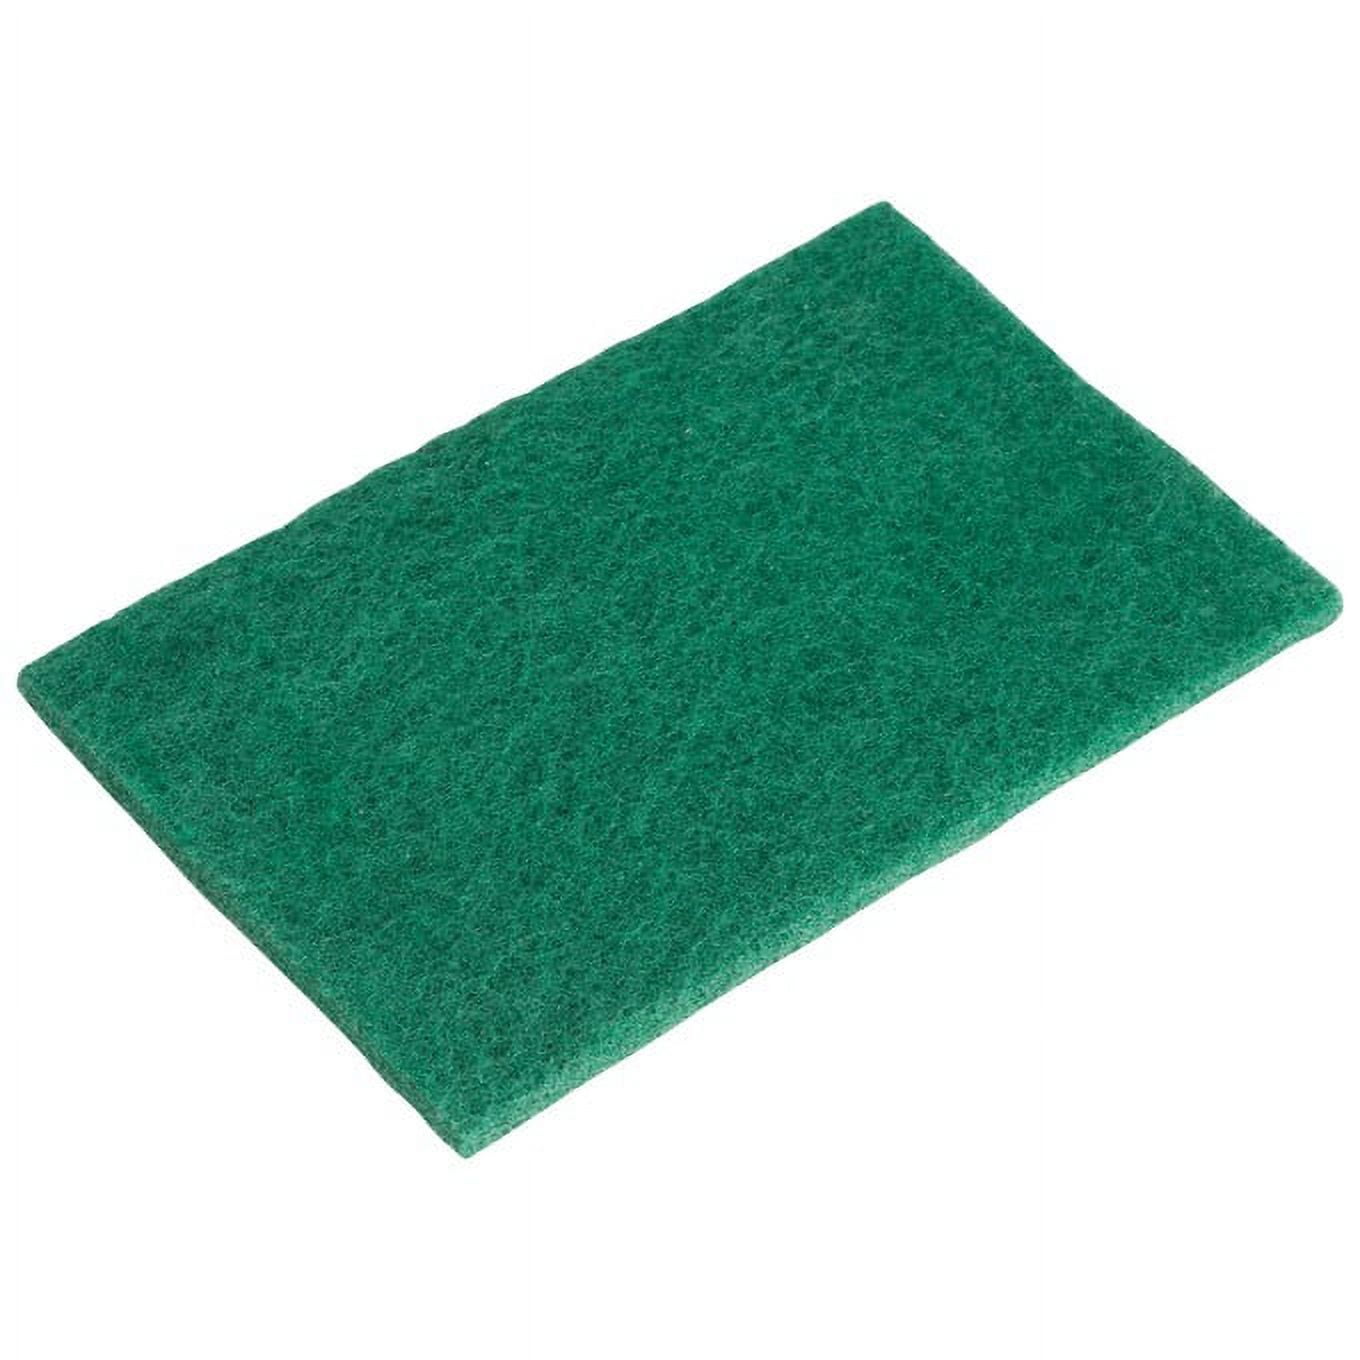 #74 Green/Yellow Med-Duty Cellulose Scouring Cleaning Sponge 20/Case